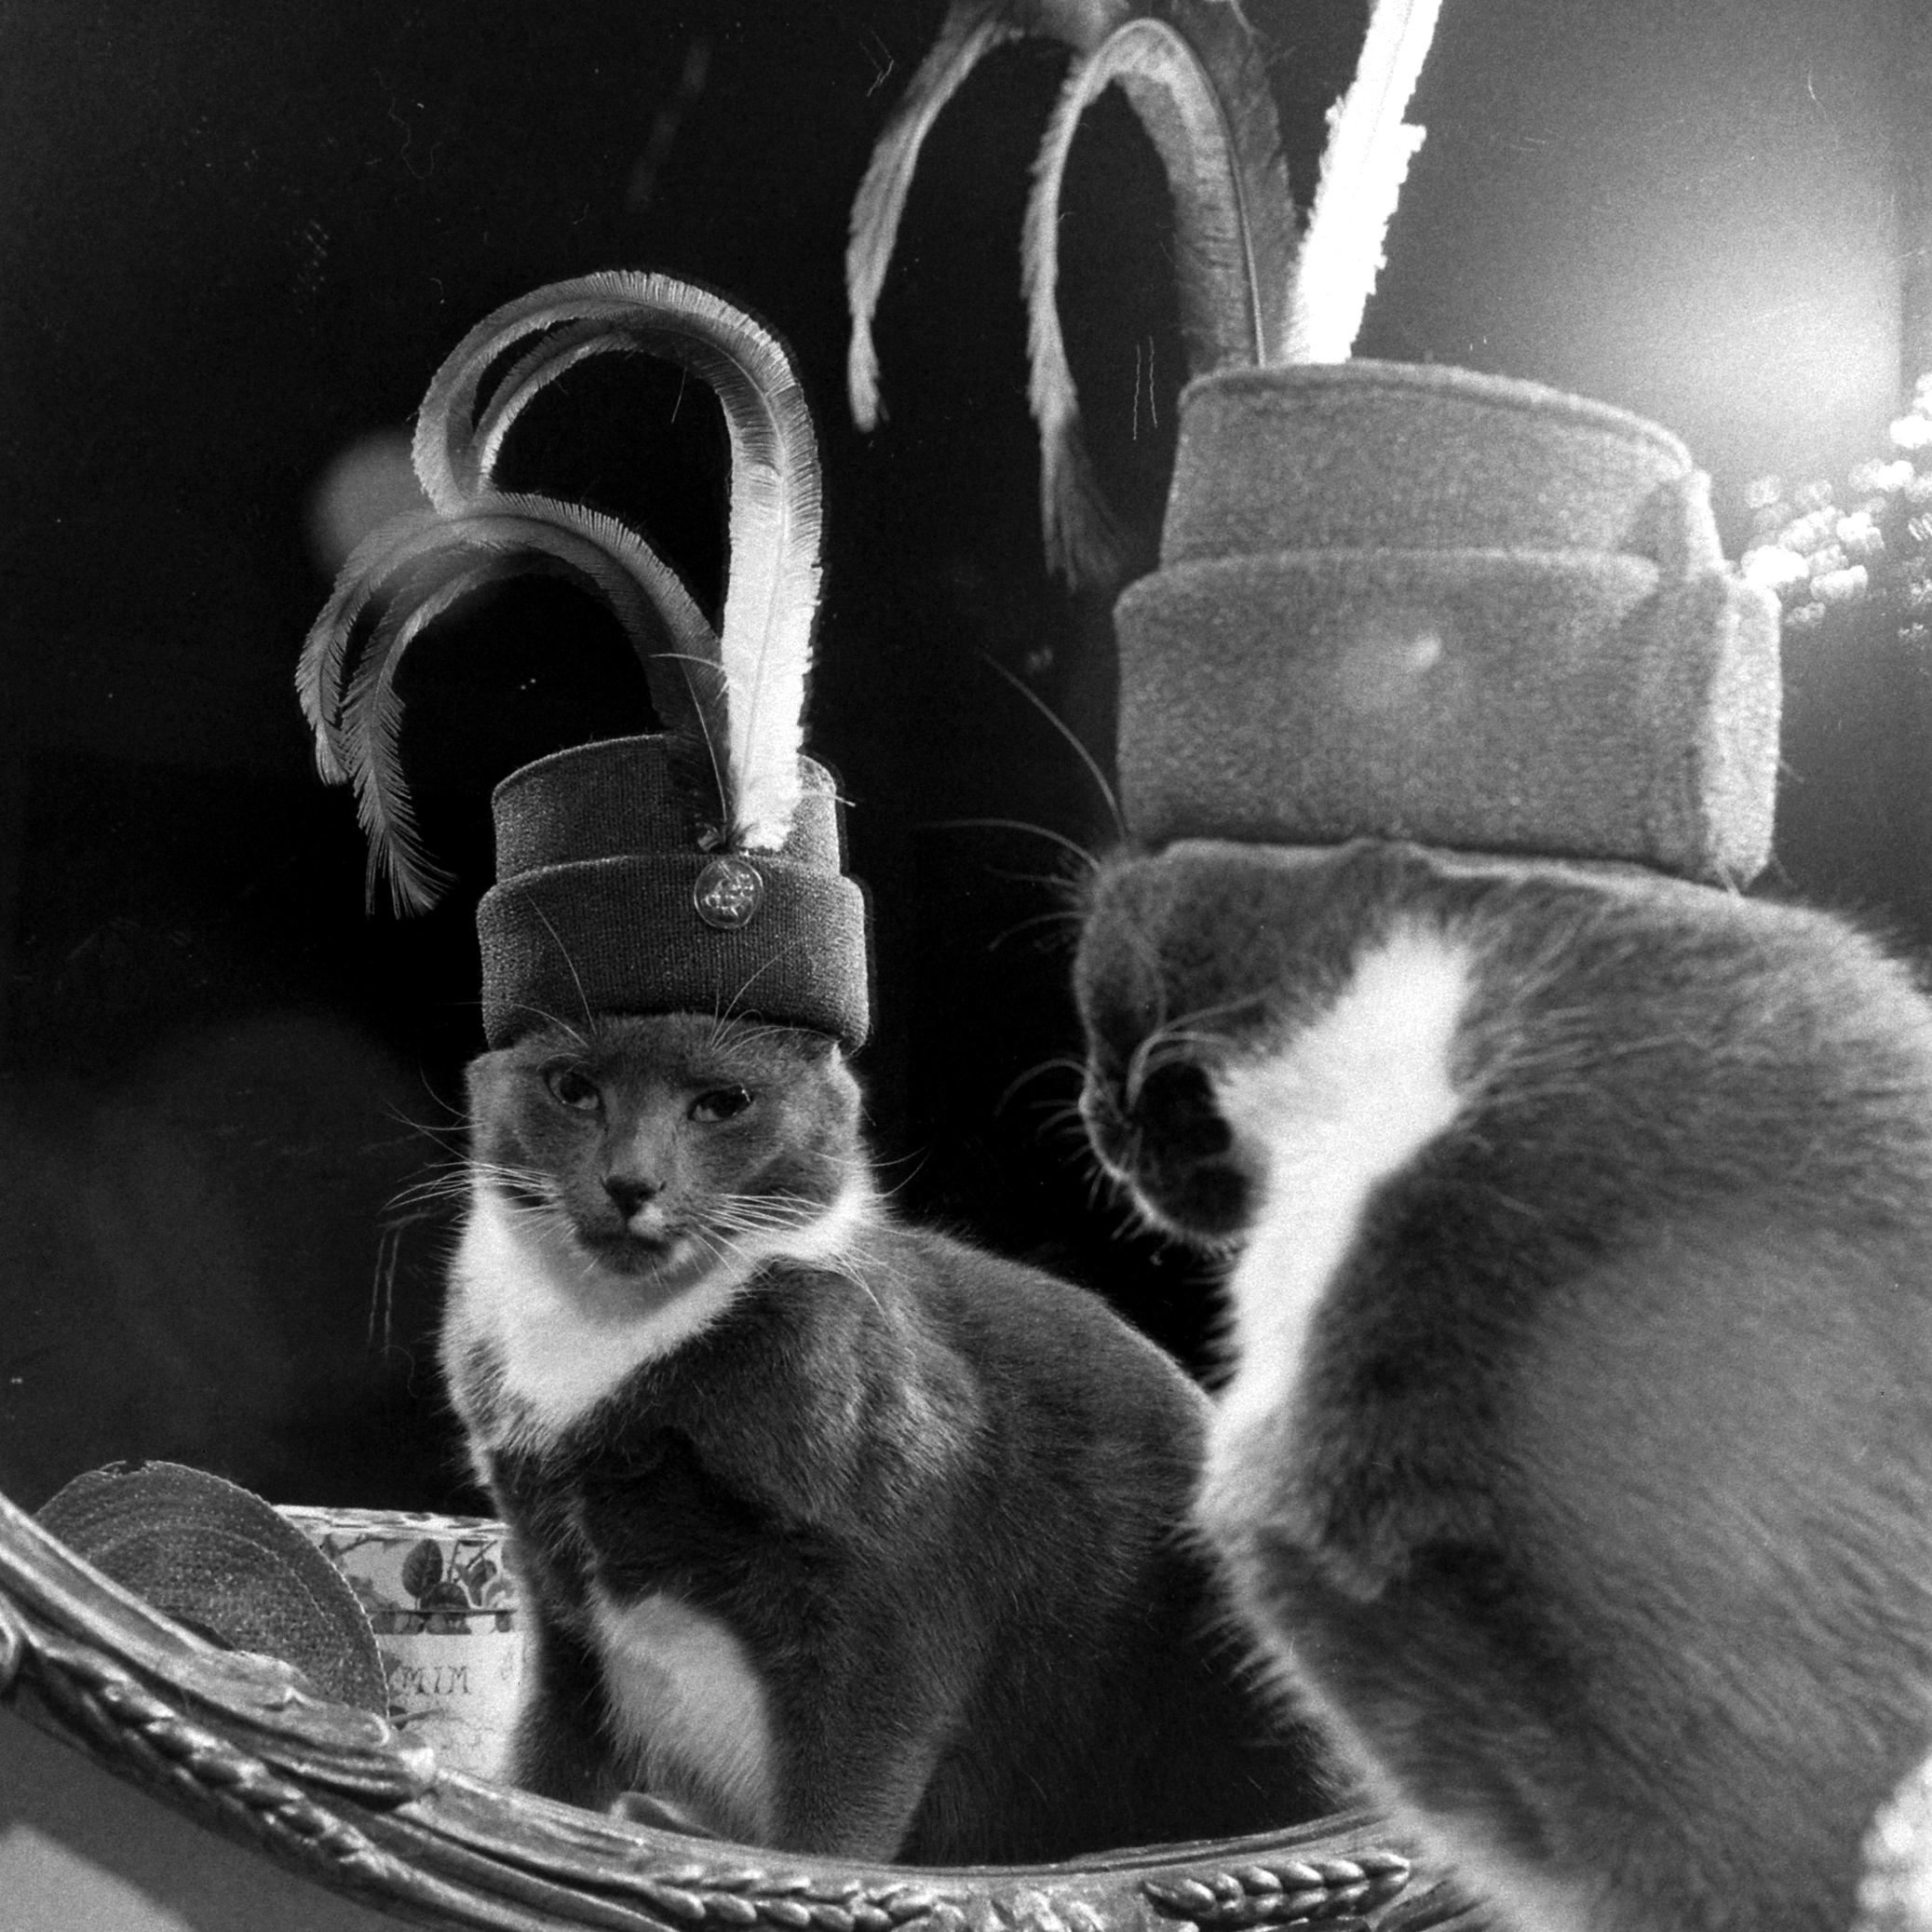 A cat named Monkey with a large hat collection, circa 1948/1949.